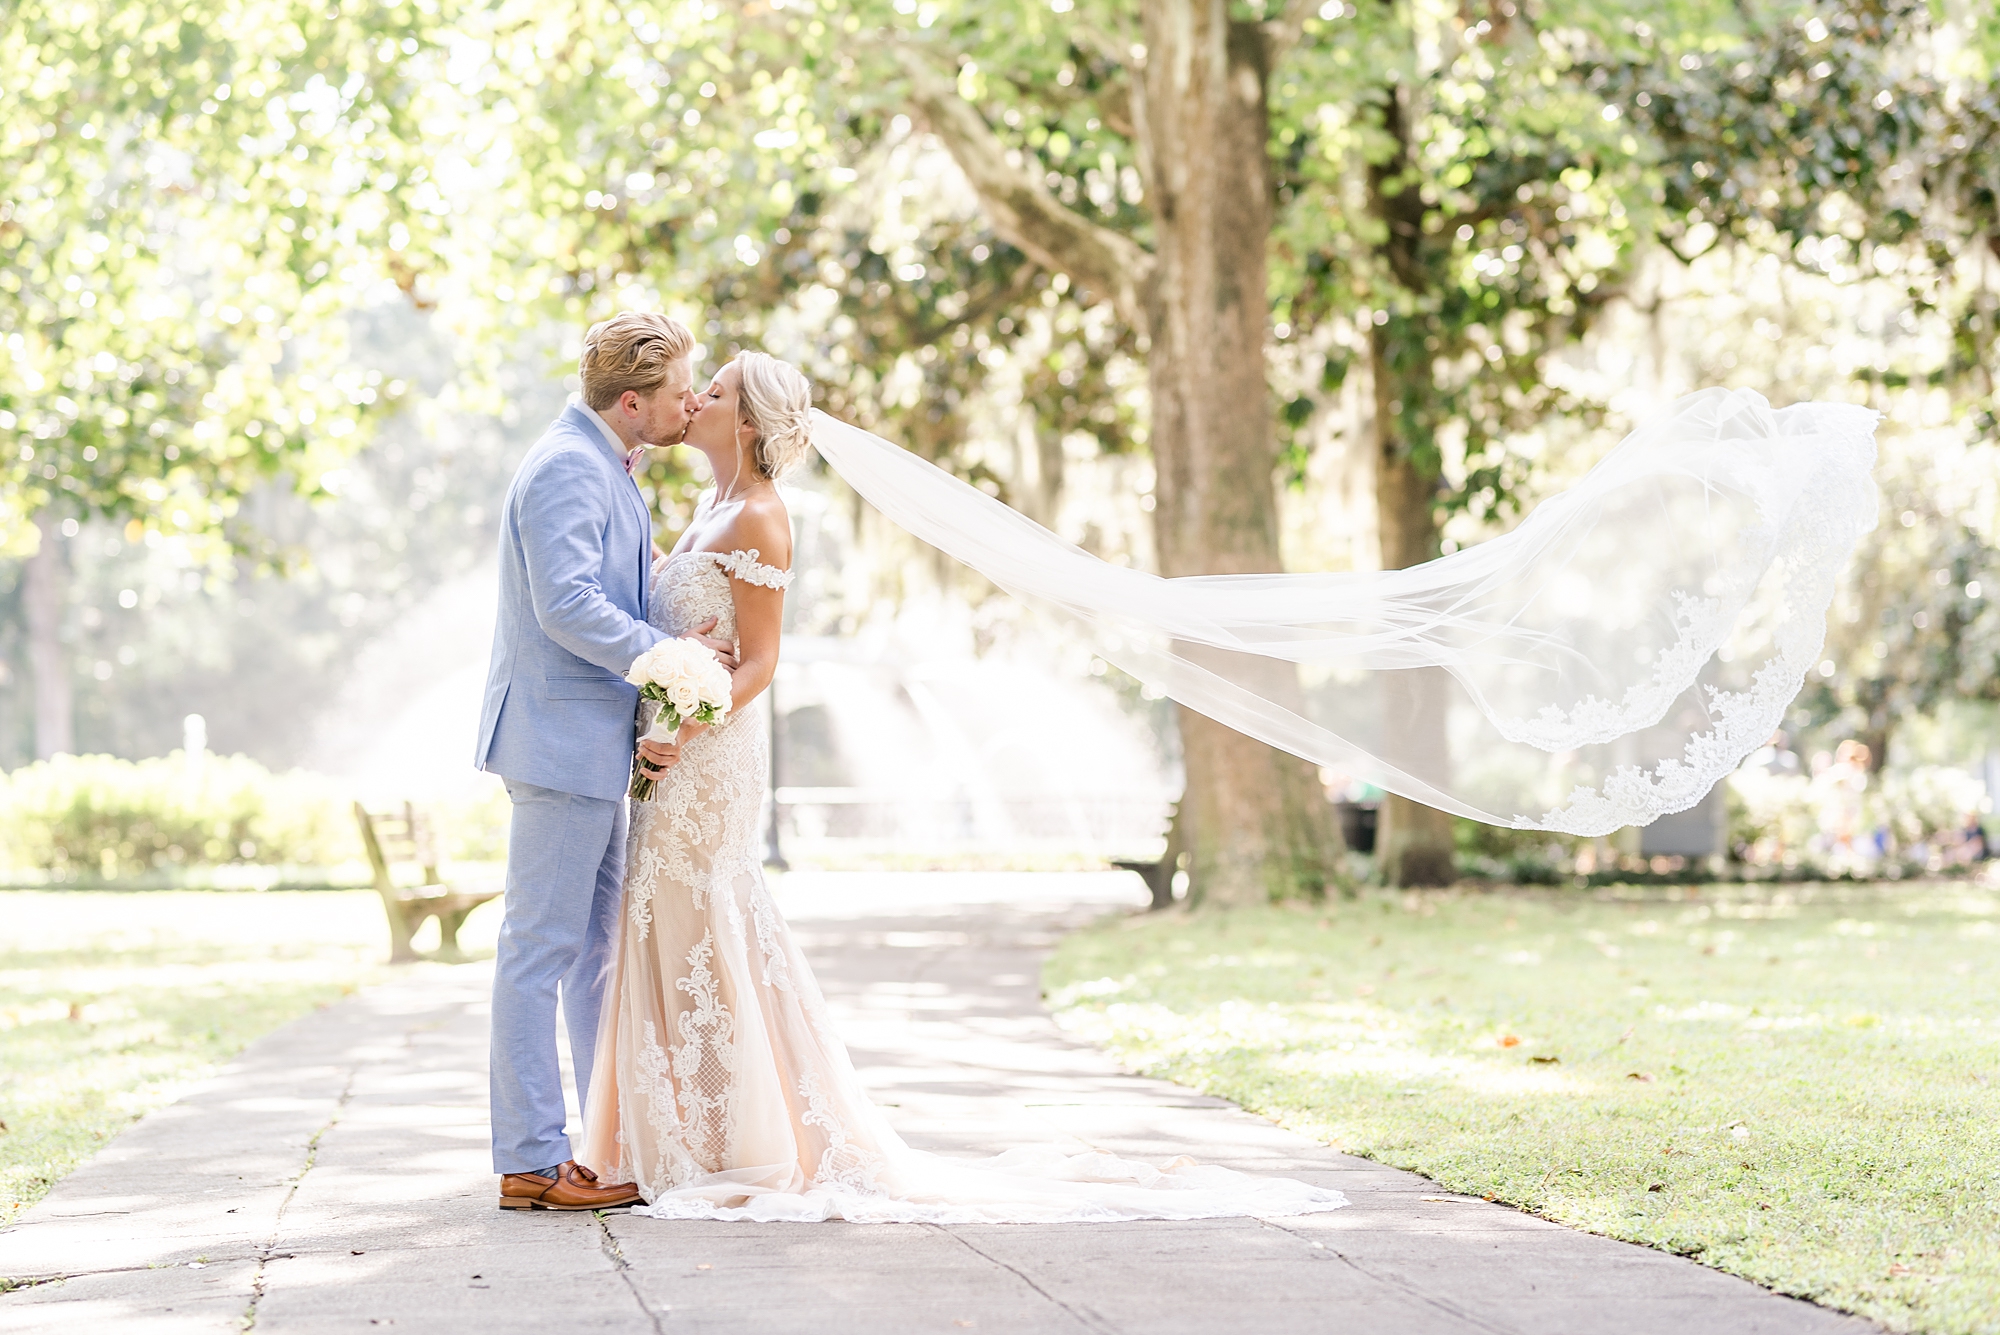 Southern wedding day photographed by destination wedding photographer Stephanie Kase Photography